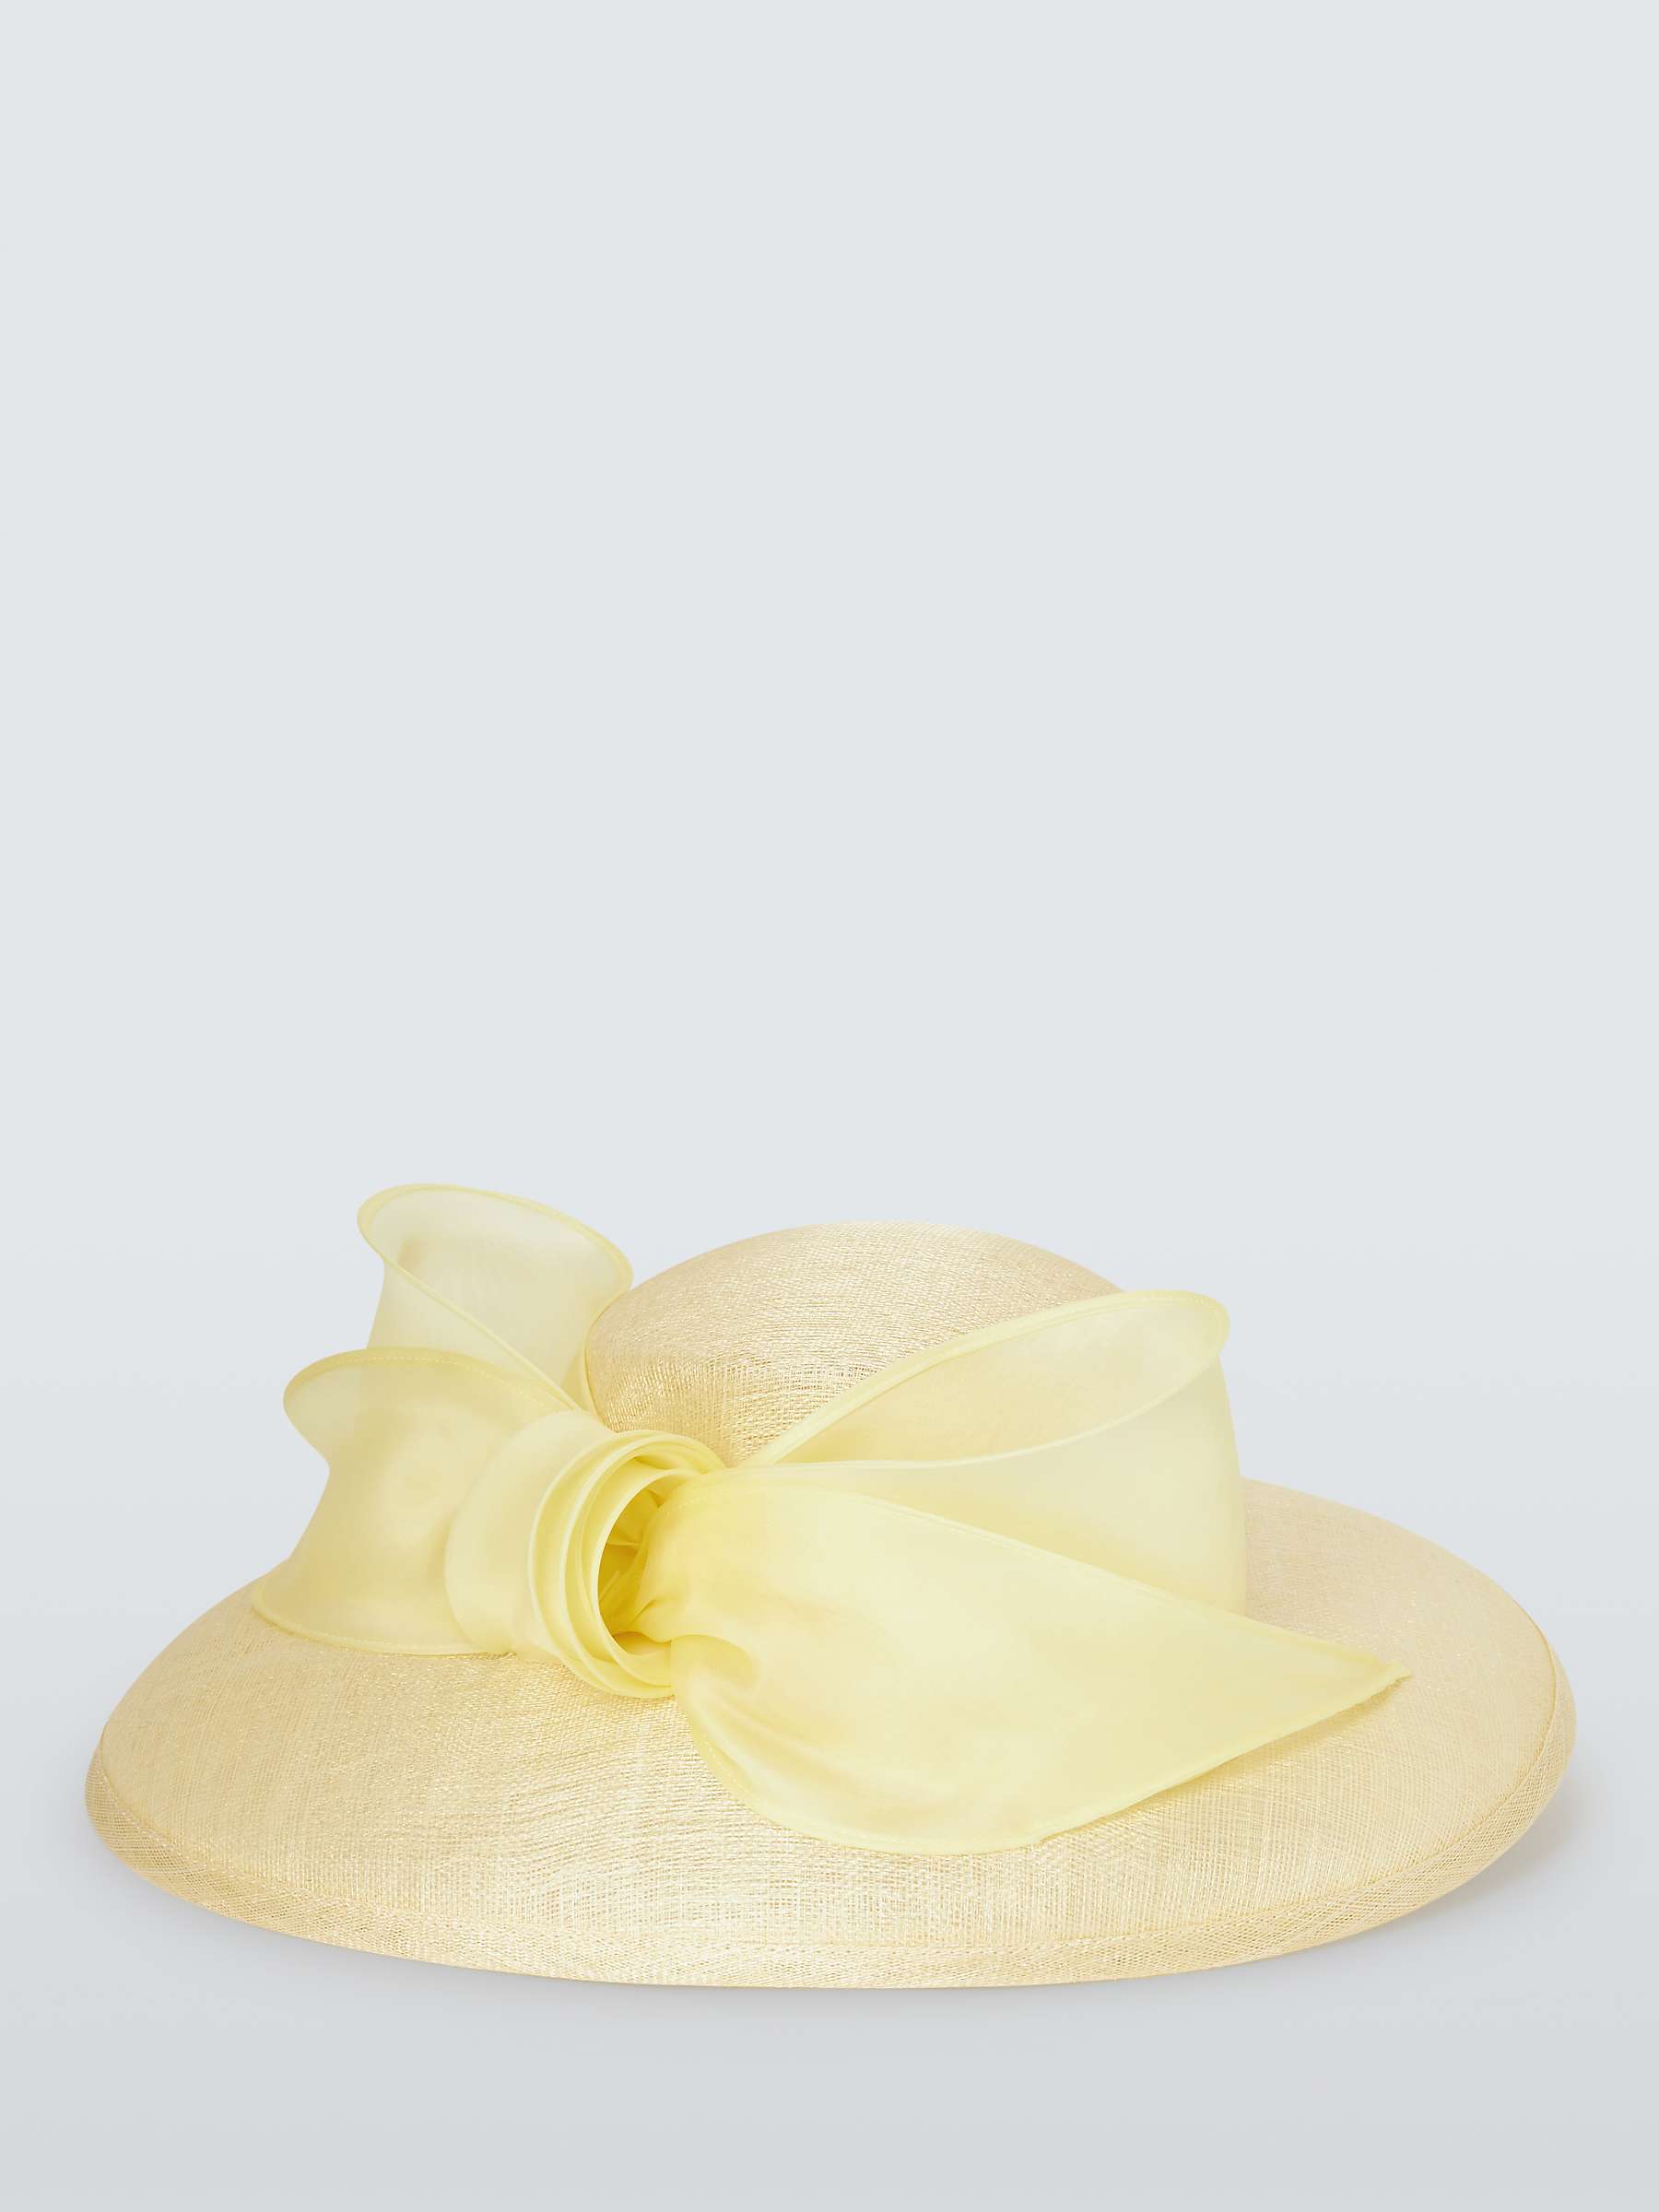 Buy Whiteley Made in England Rhiannon Satin Bow Occasion Hat, Yellow Online at johnlewis.com